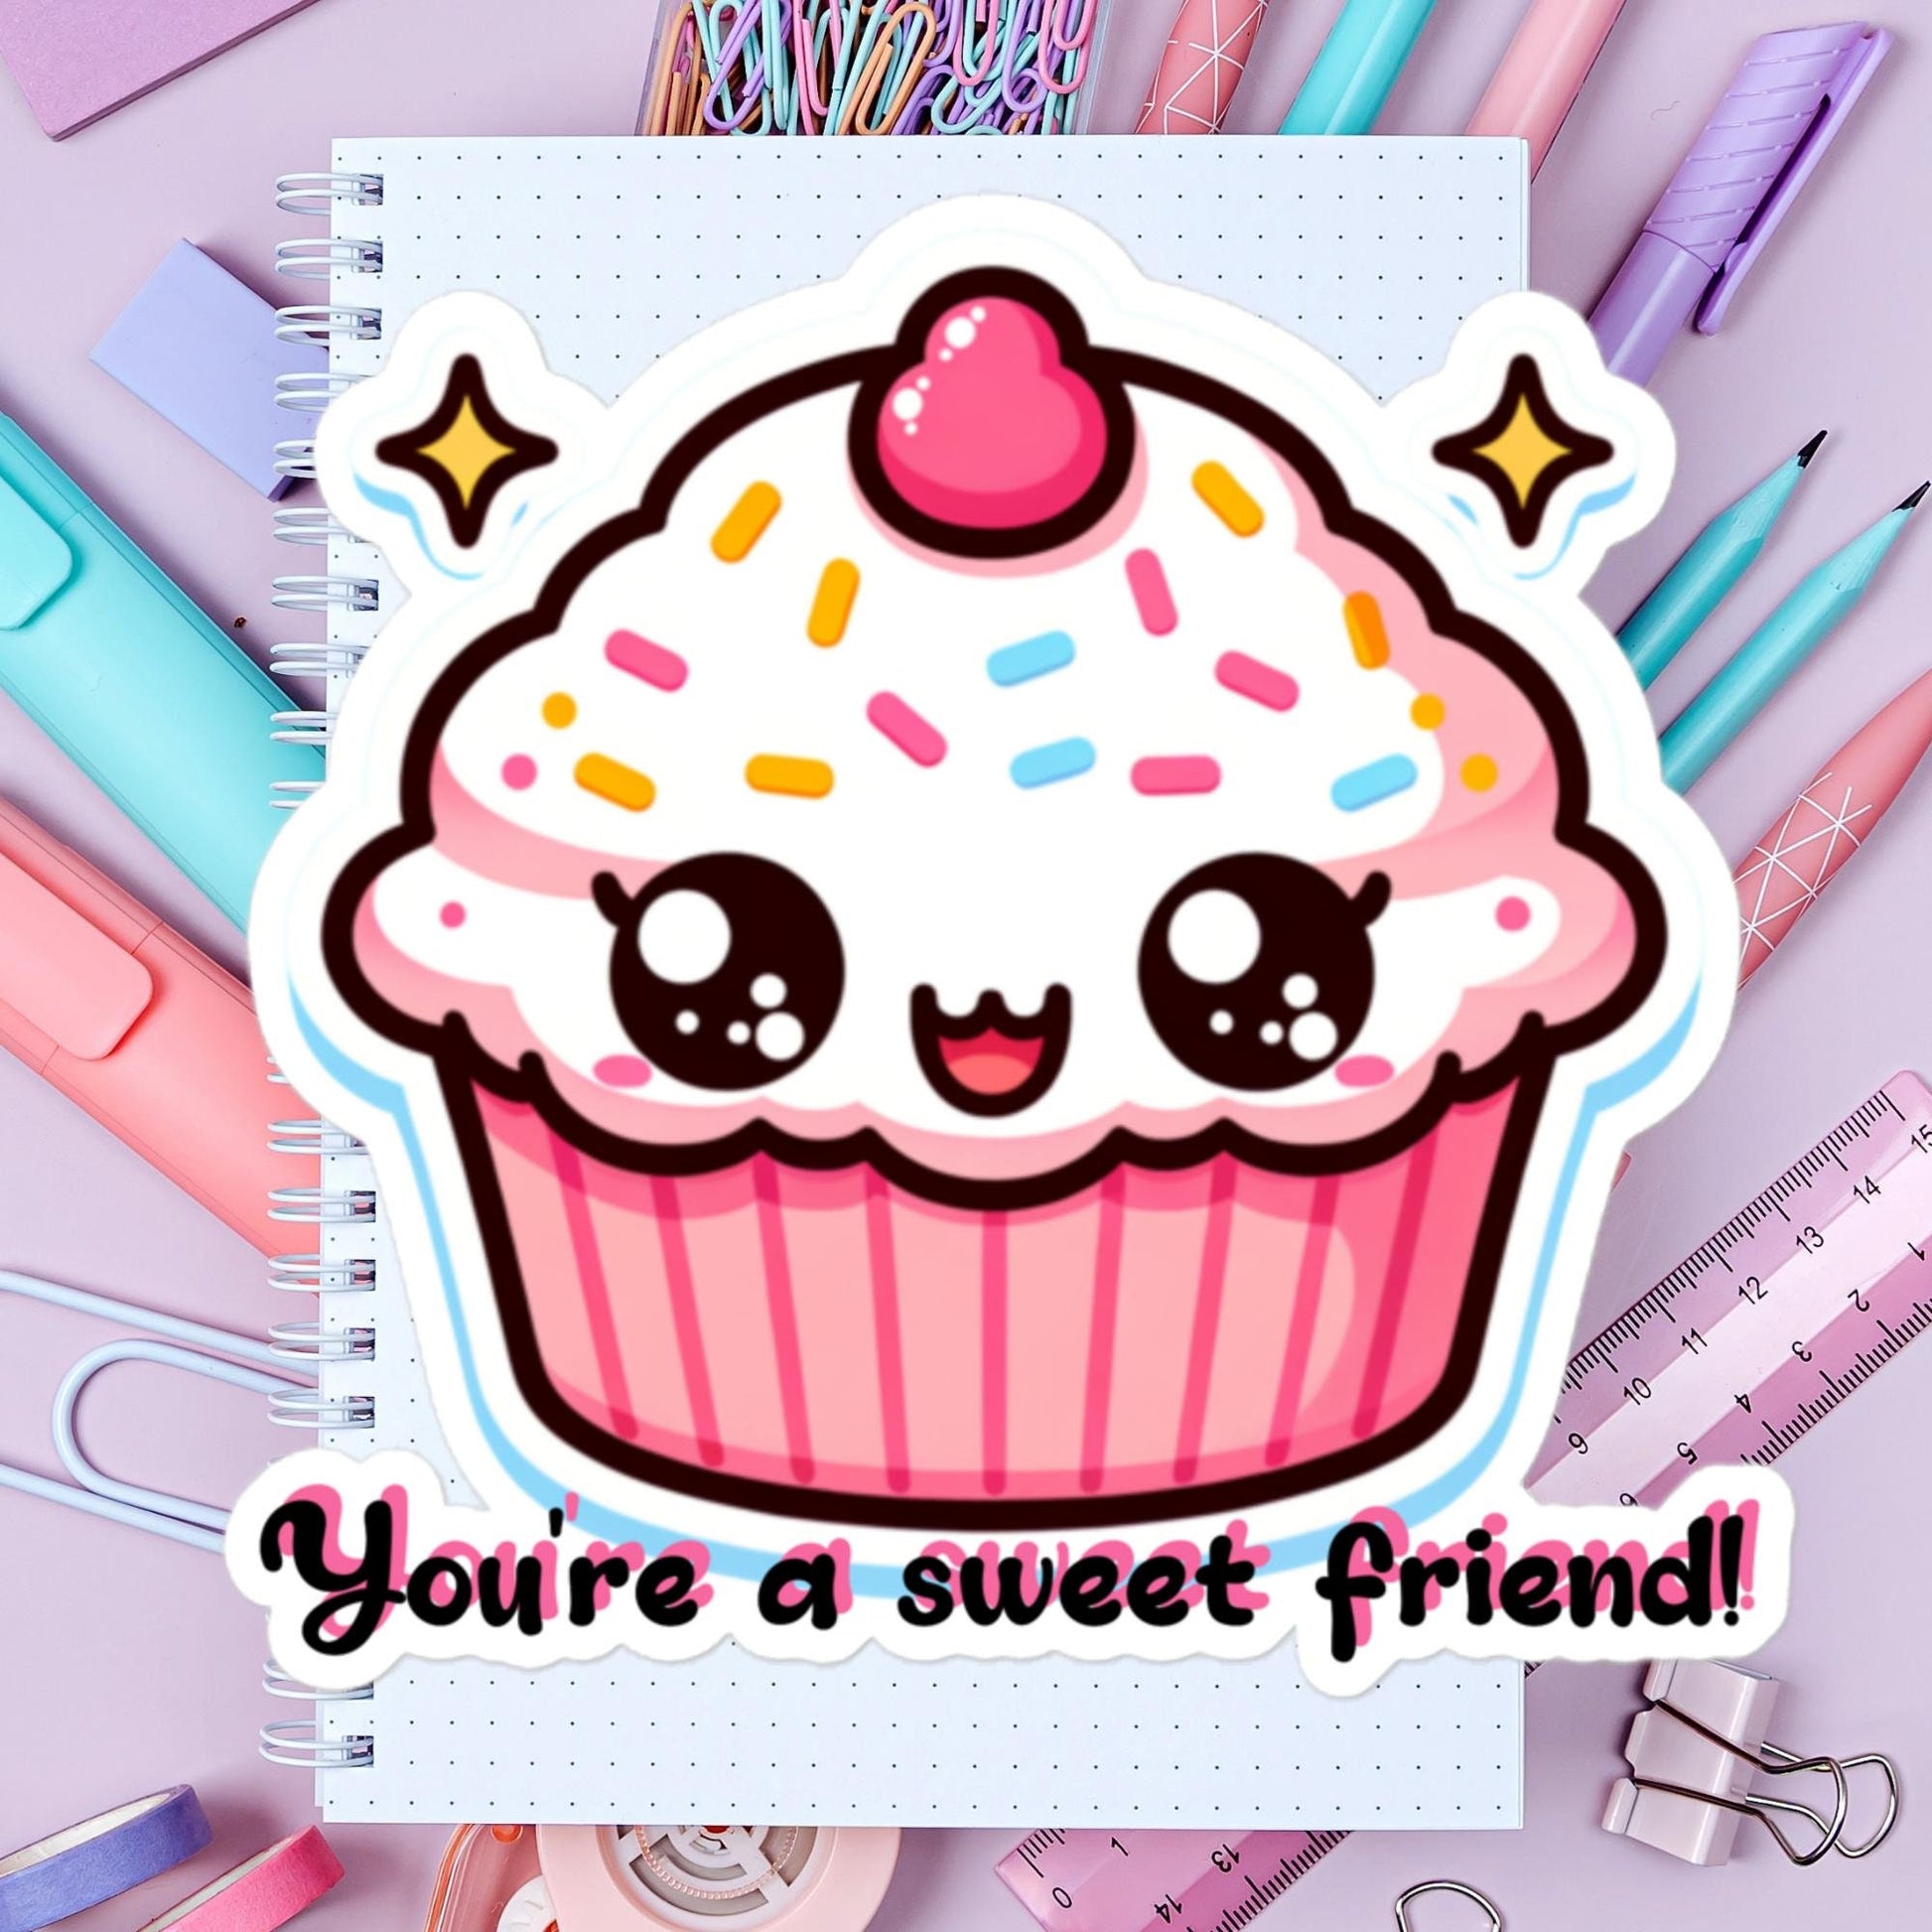 Stickers Cupcake Friend Gift Stickers Gifts Friends Baking Kitchen Humor Friends Stickers Gifts